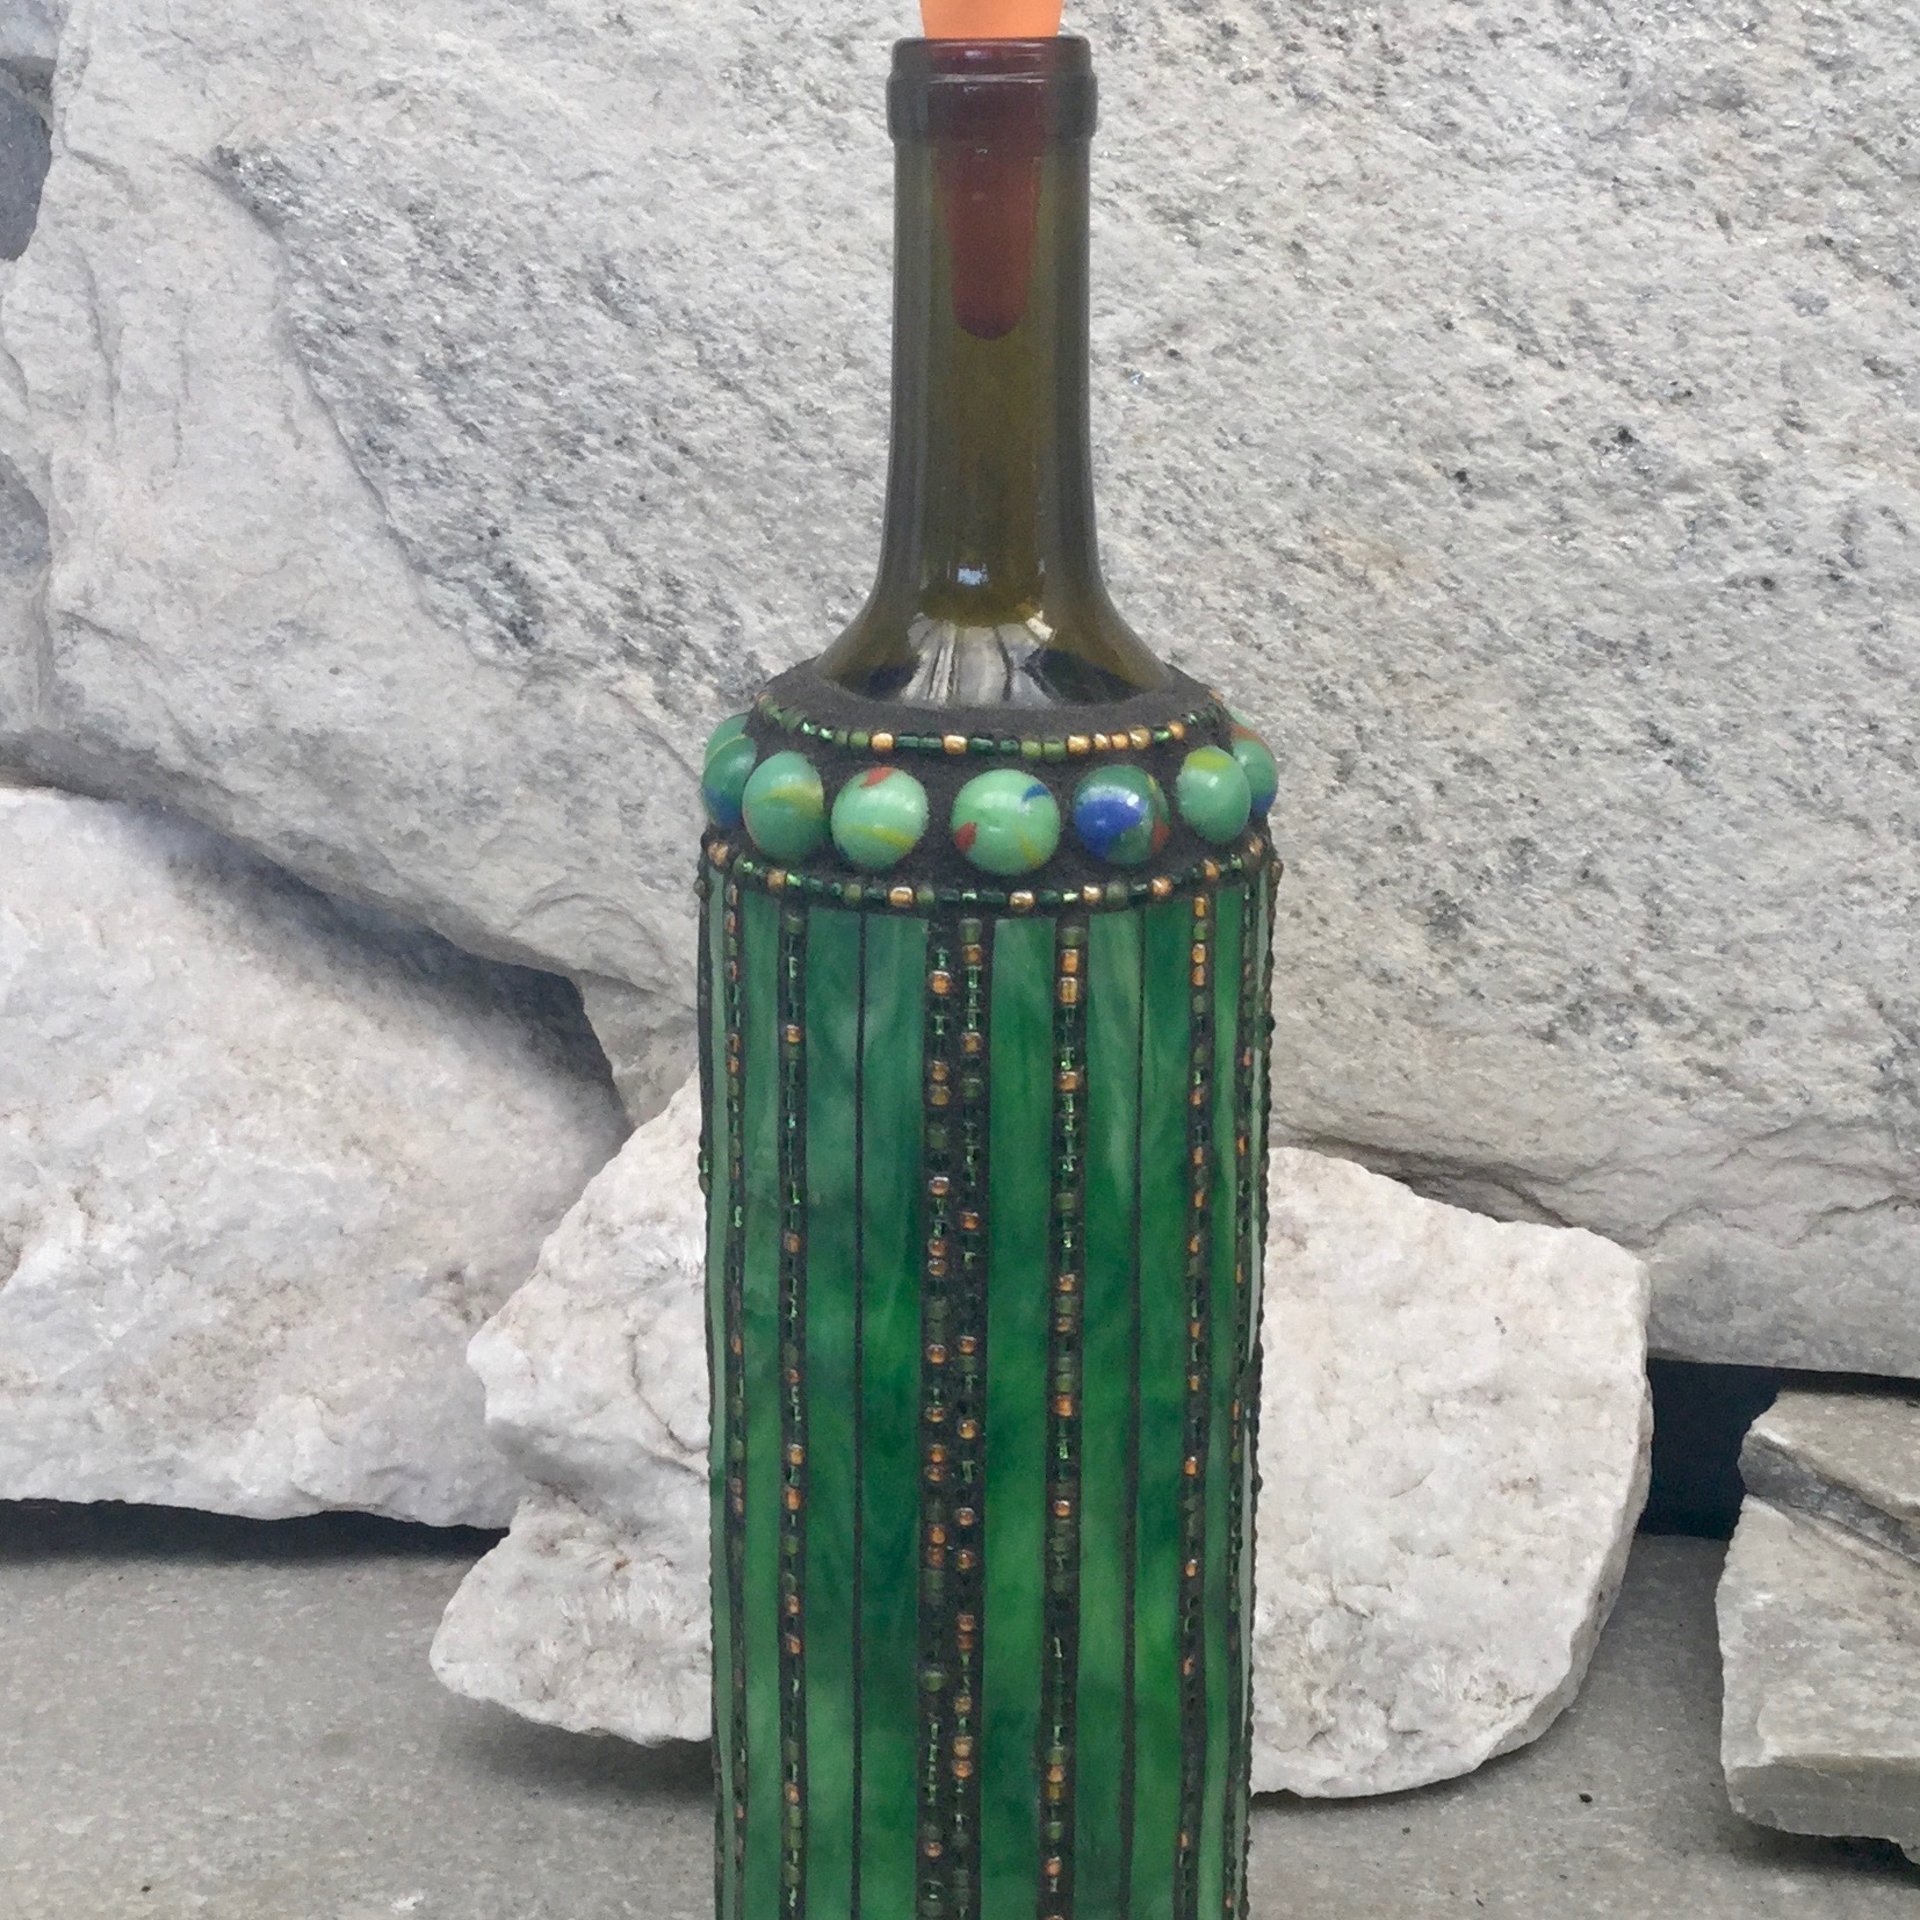 Mosaic Bottle. (3) Up-cycled Decanter, for Cooking Sherry, Olive Oil, Vinegar, Housewarming Gift,